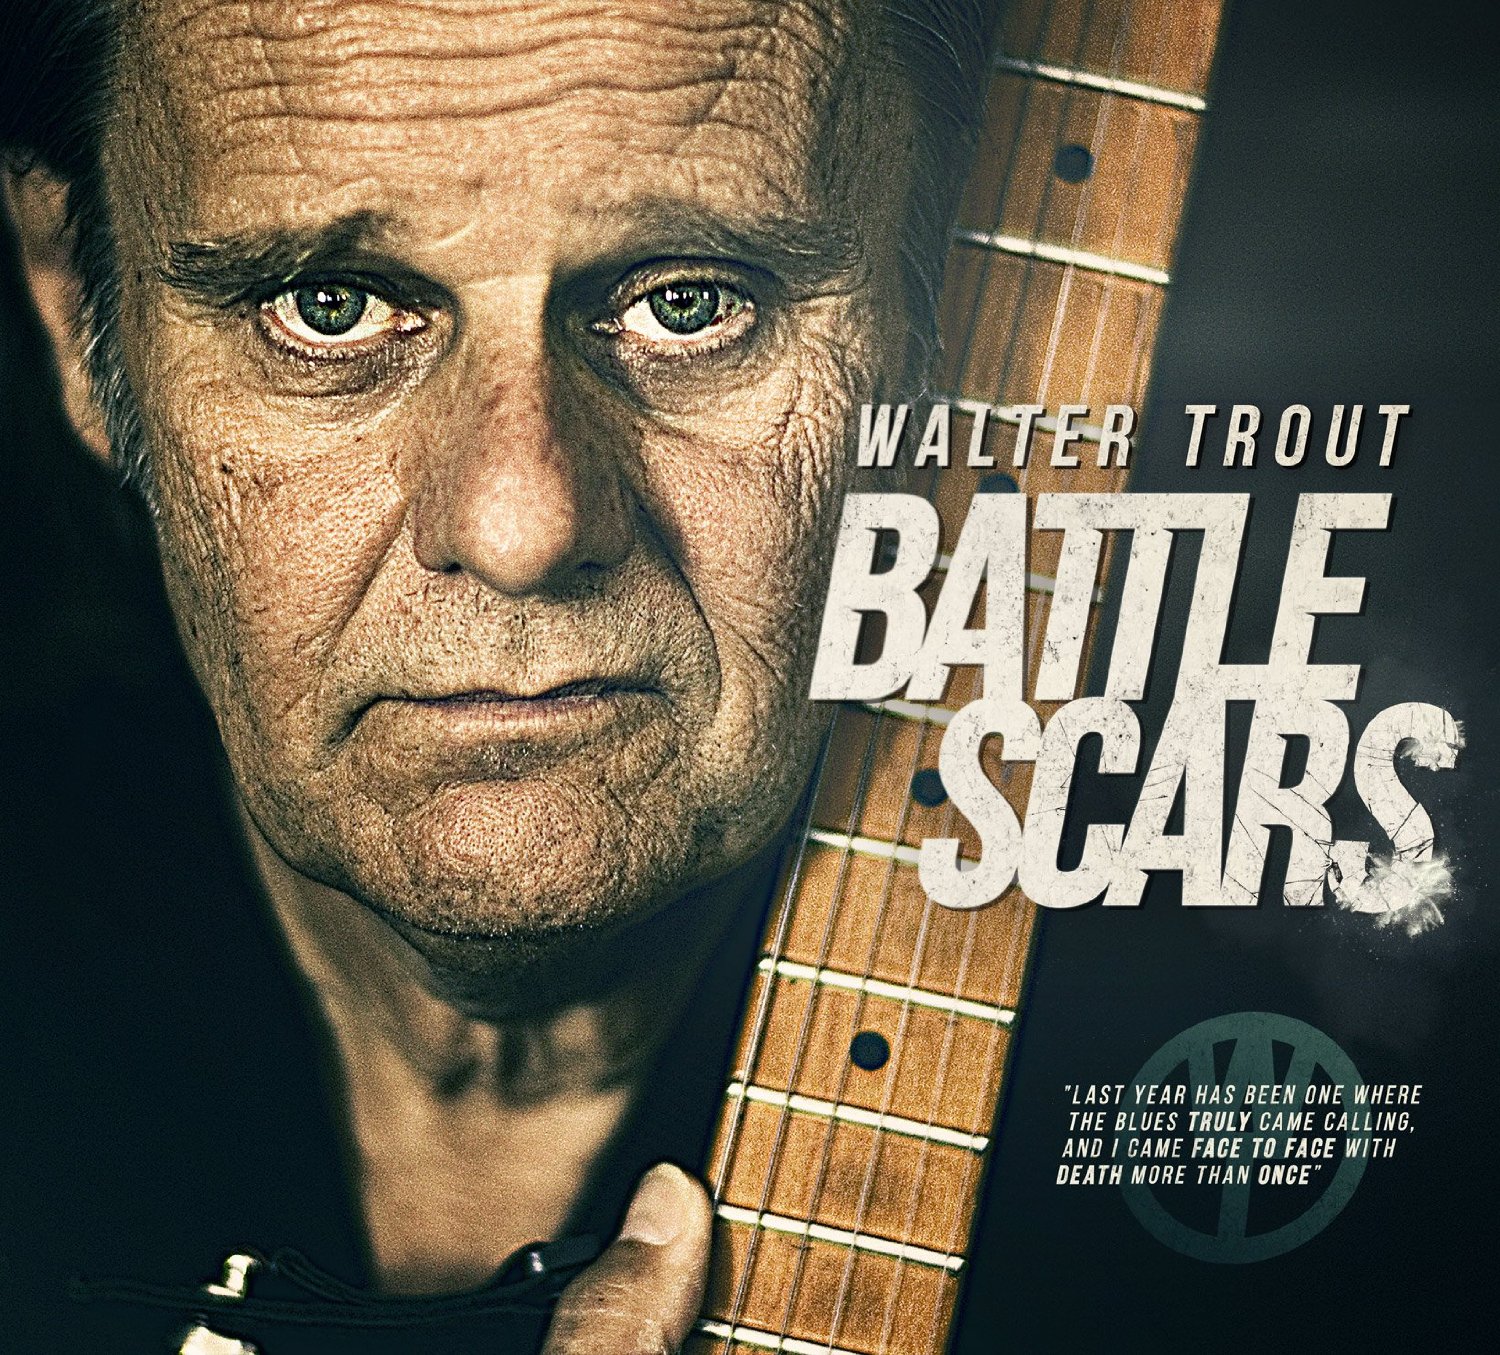 WALTER TROUT – Gonna live again